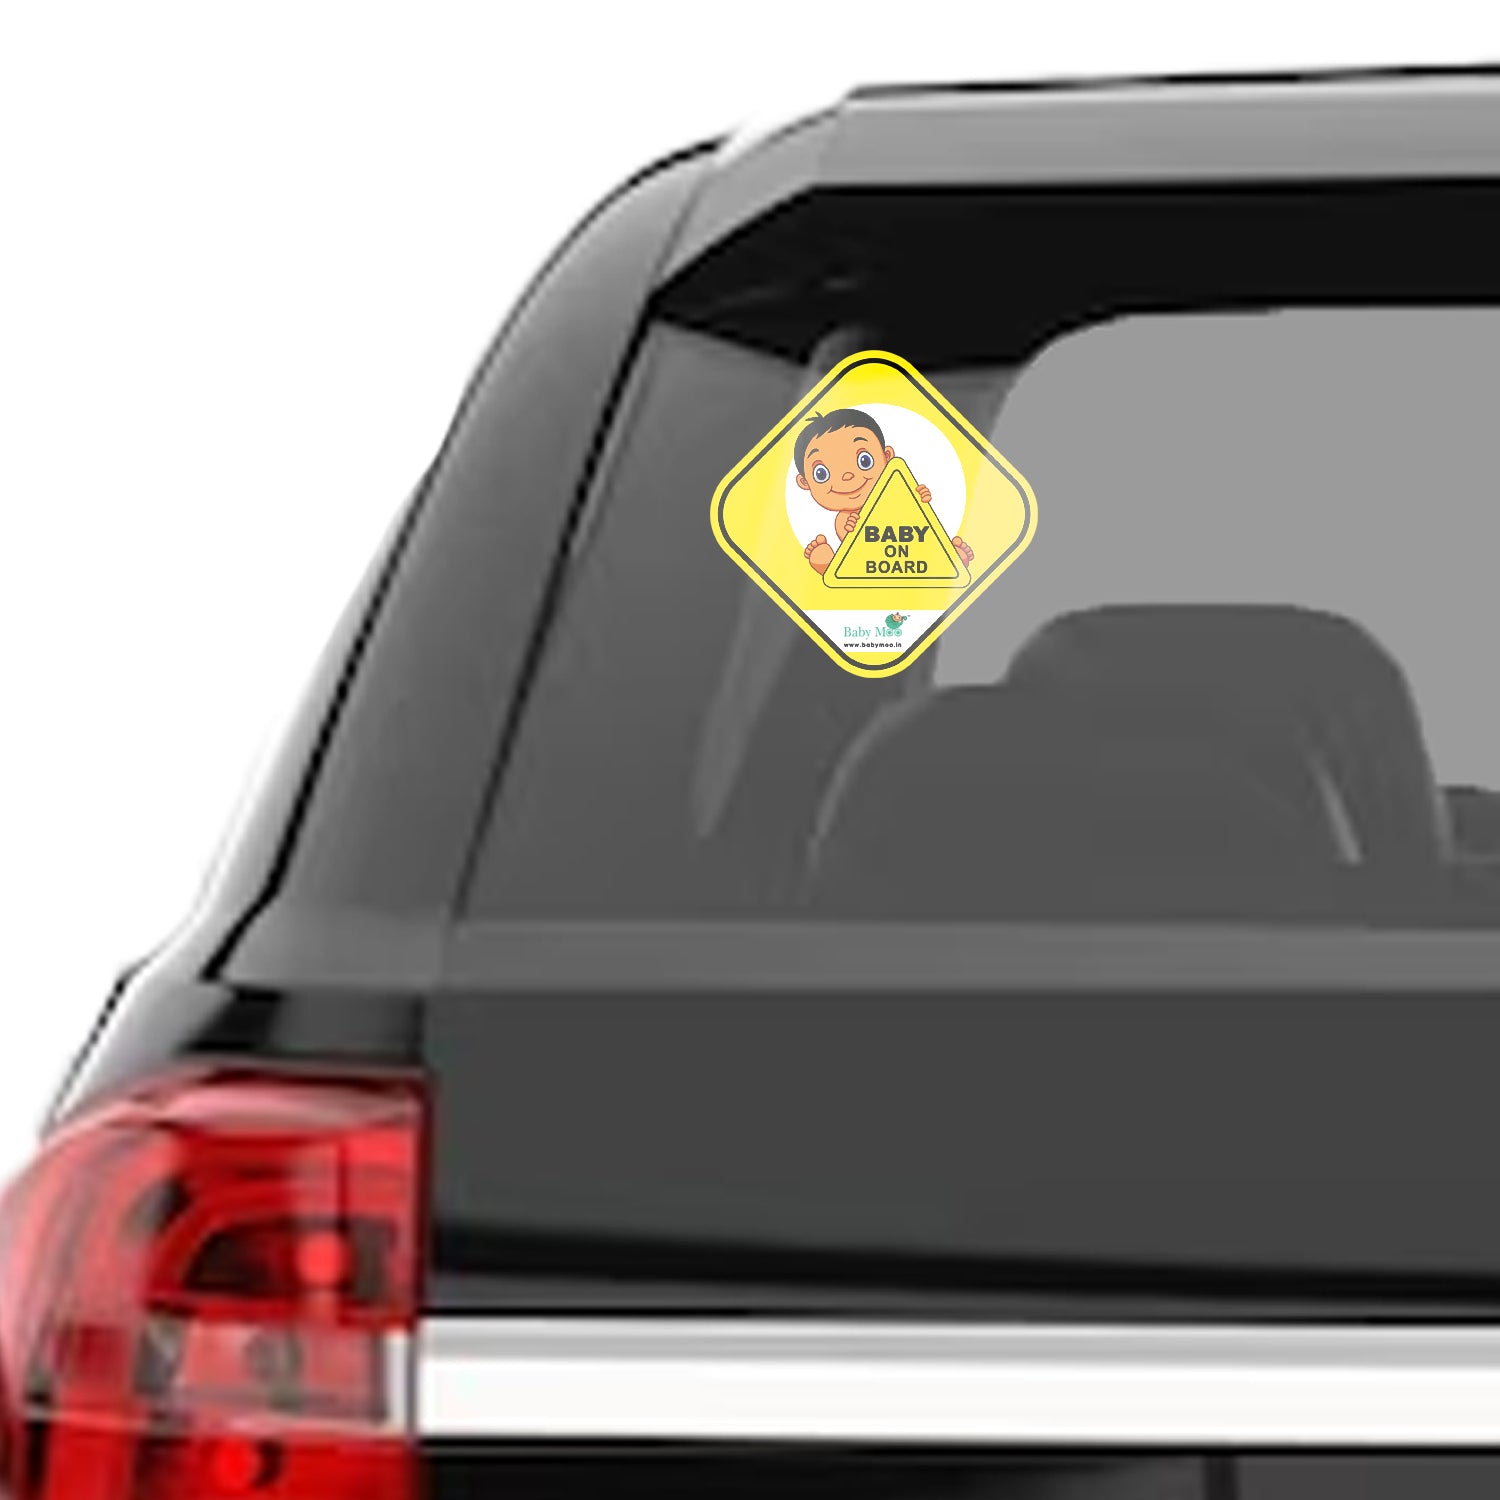 Baby Moo Kids On Board Car Safety Sign With Vacuum Suction Cup Clip - Yellow - Baby Moo